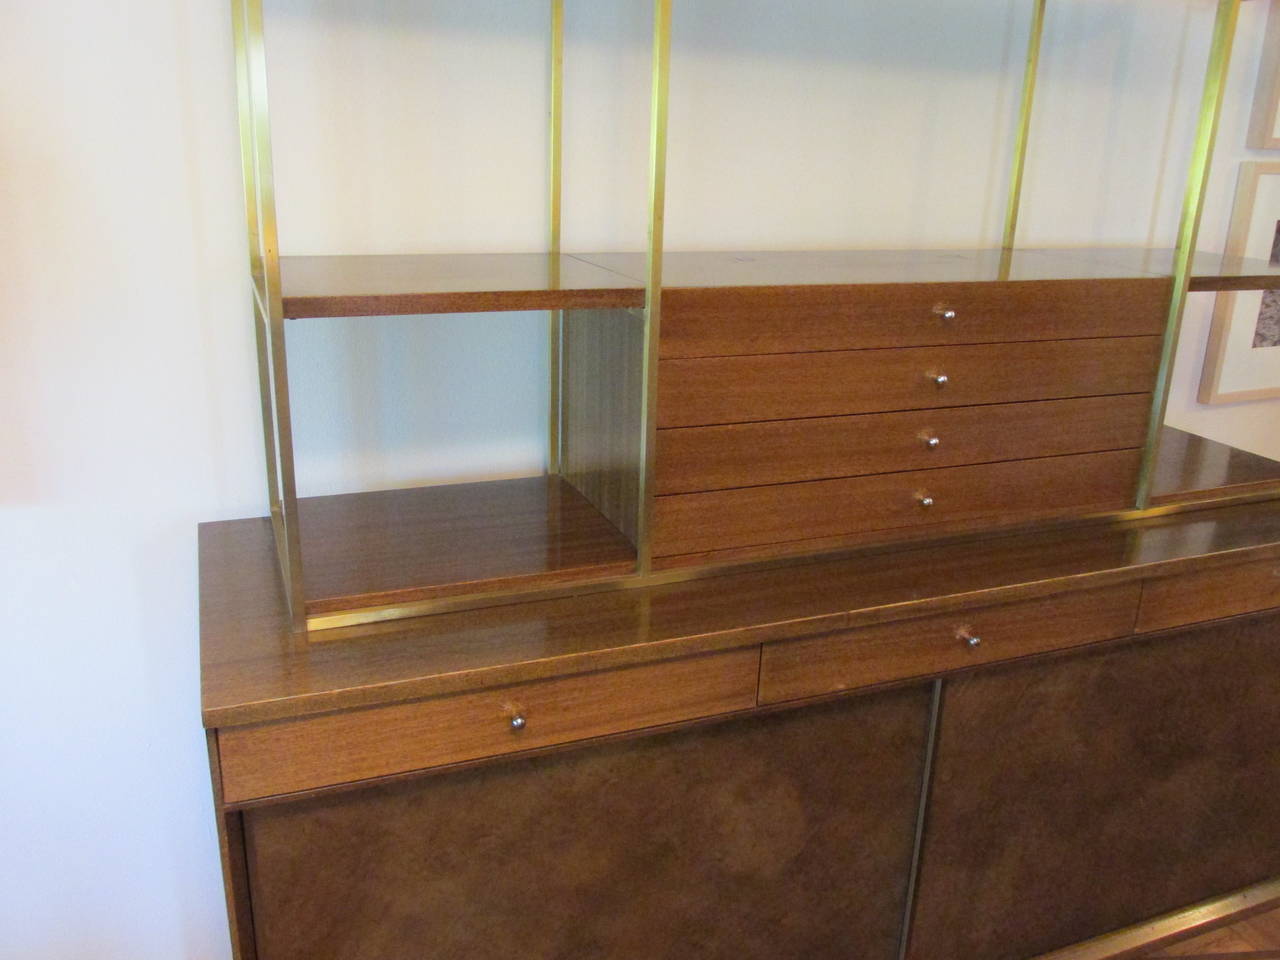 Large walnut and brass credenza with removable top. Legs are joined by an X-shaped brass stretcher. Bought from original owner who purchased it in 1954. Top drawer on bottom part has metal Calvin tag.